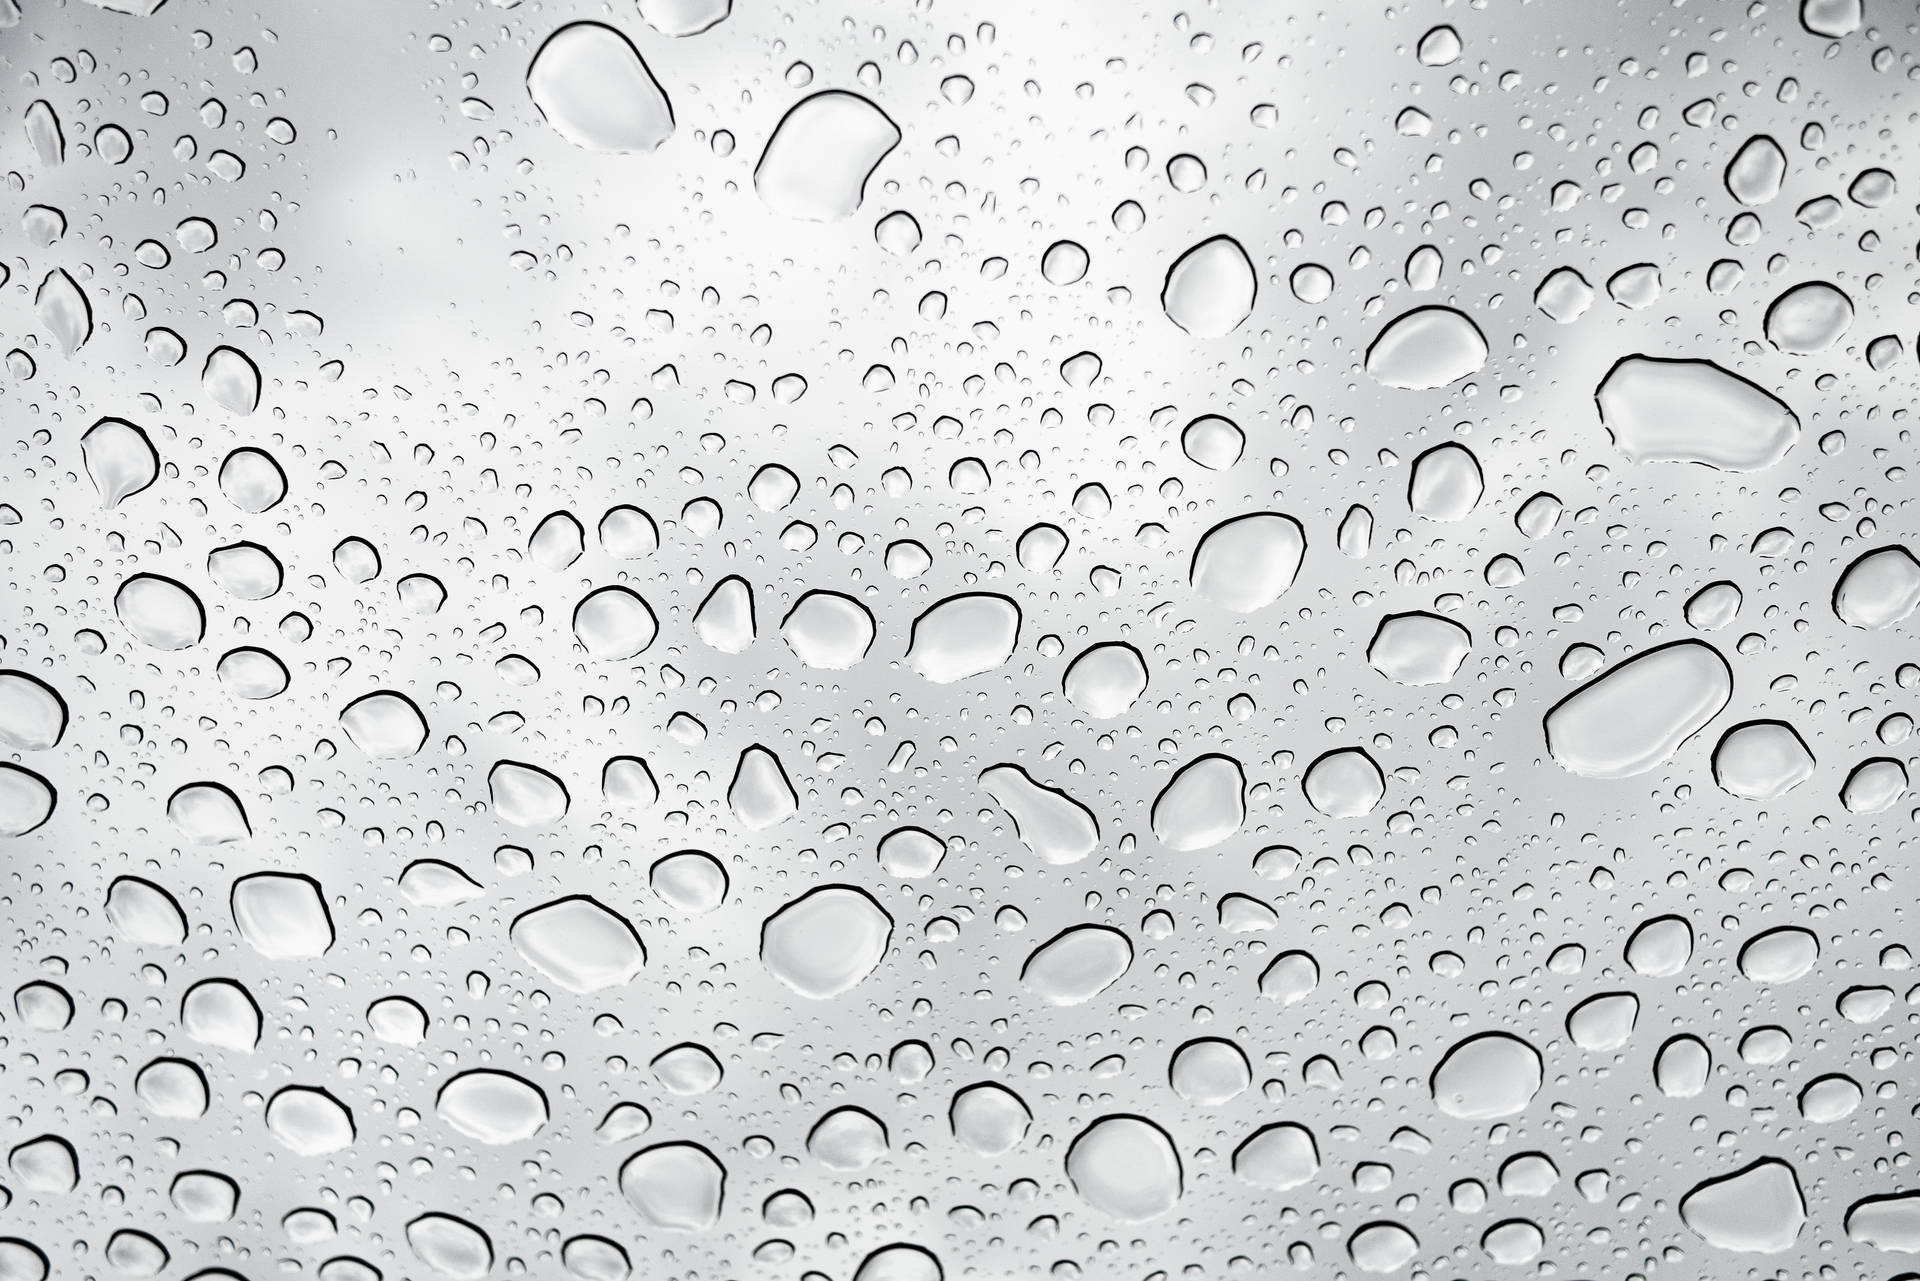 Raining Droplets On Glass Surface Wallpaper